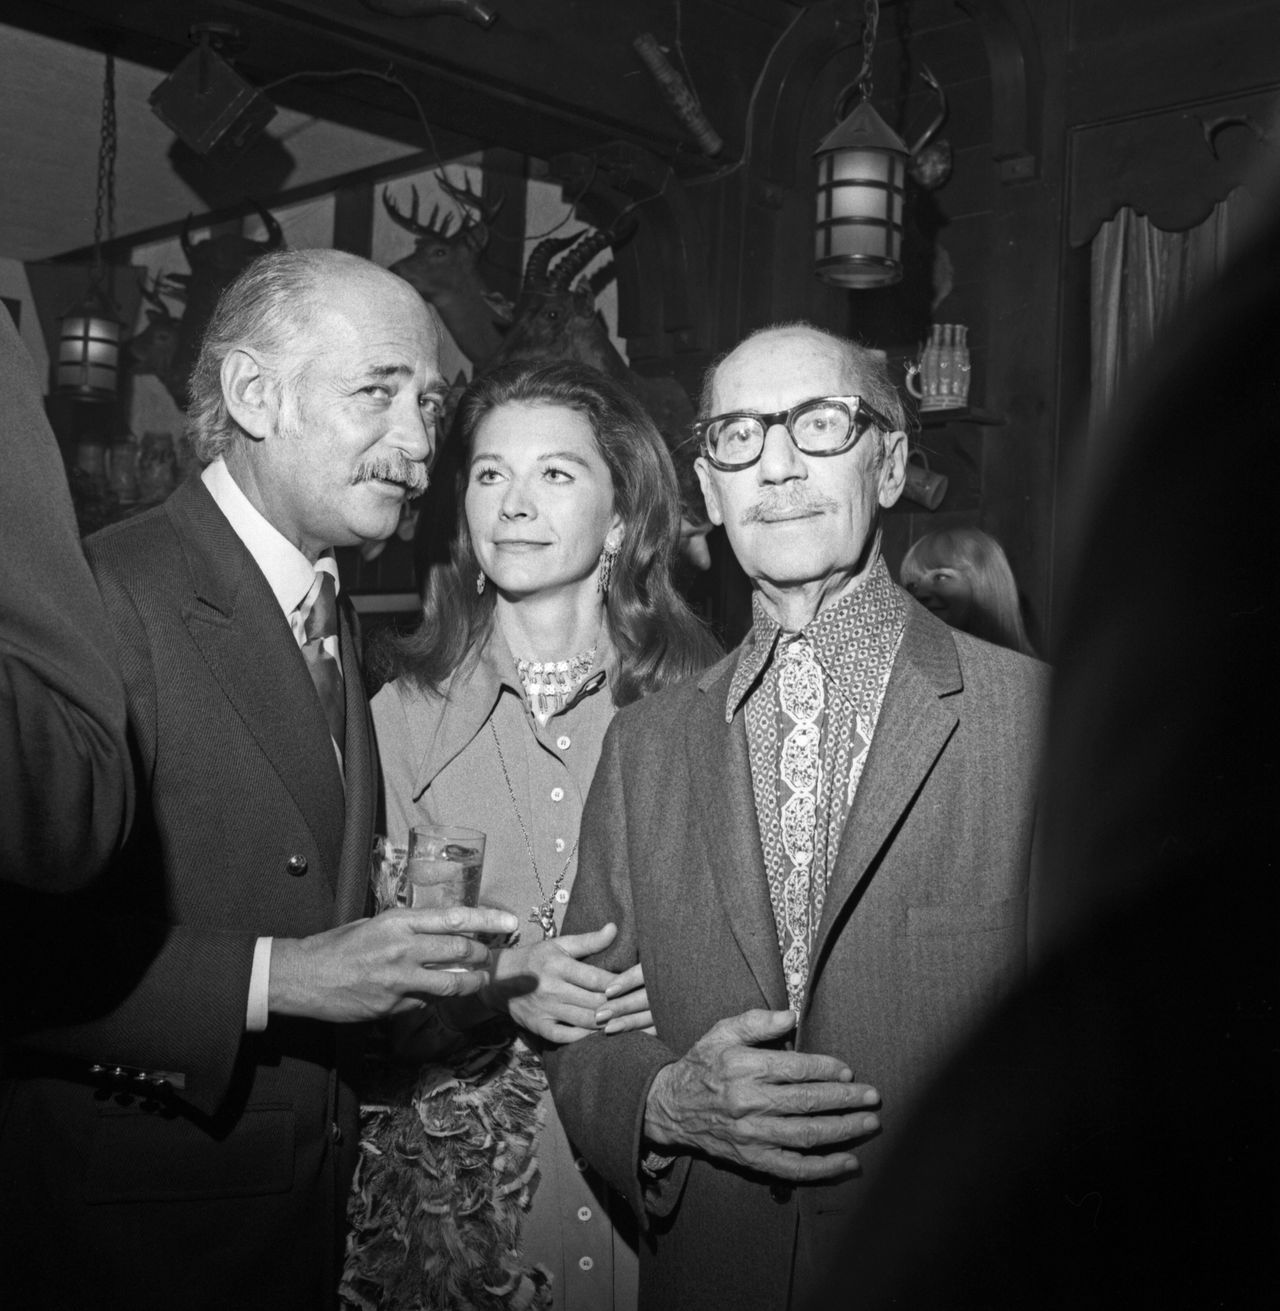 Lear (left) speaks with guests including Groucho Marx (right) at a cocktail party held for Lear at the 21 Club in New York City on May 1, 1972.